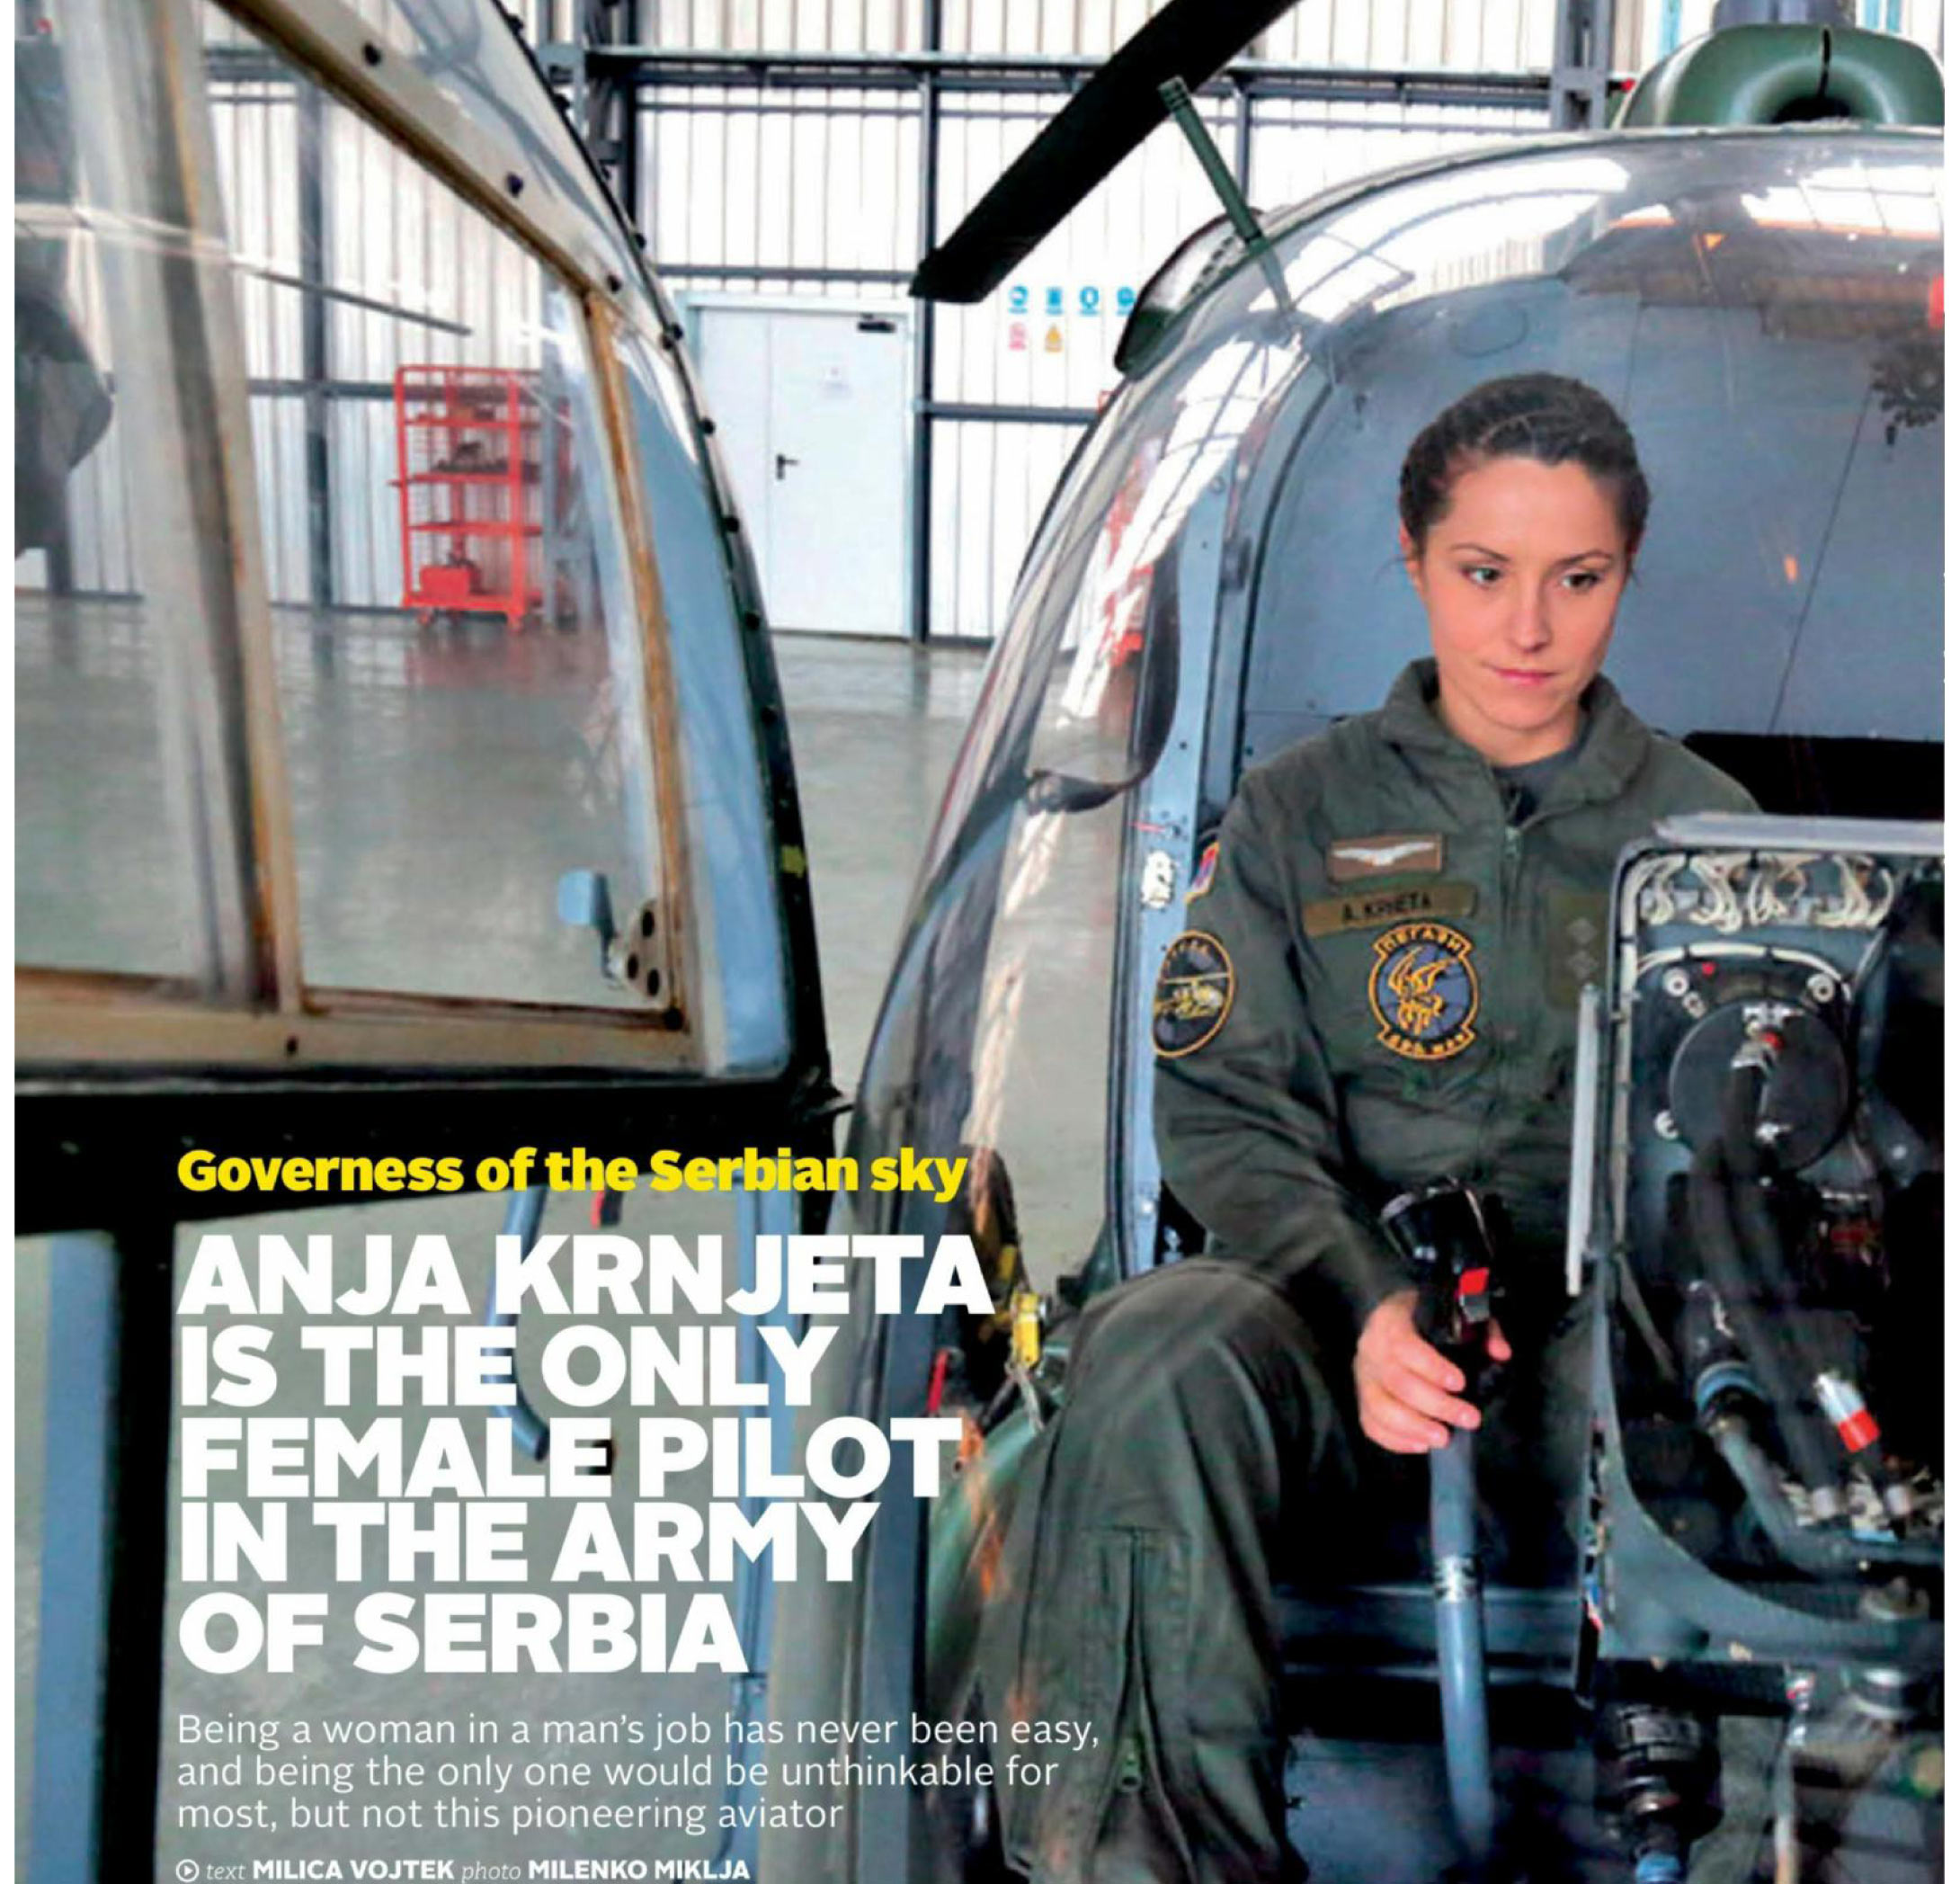 Anja Krneta is the only female pilot in the Army of Serbia